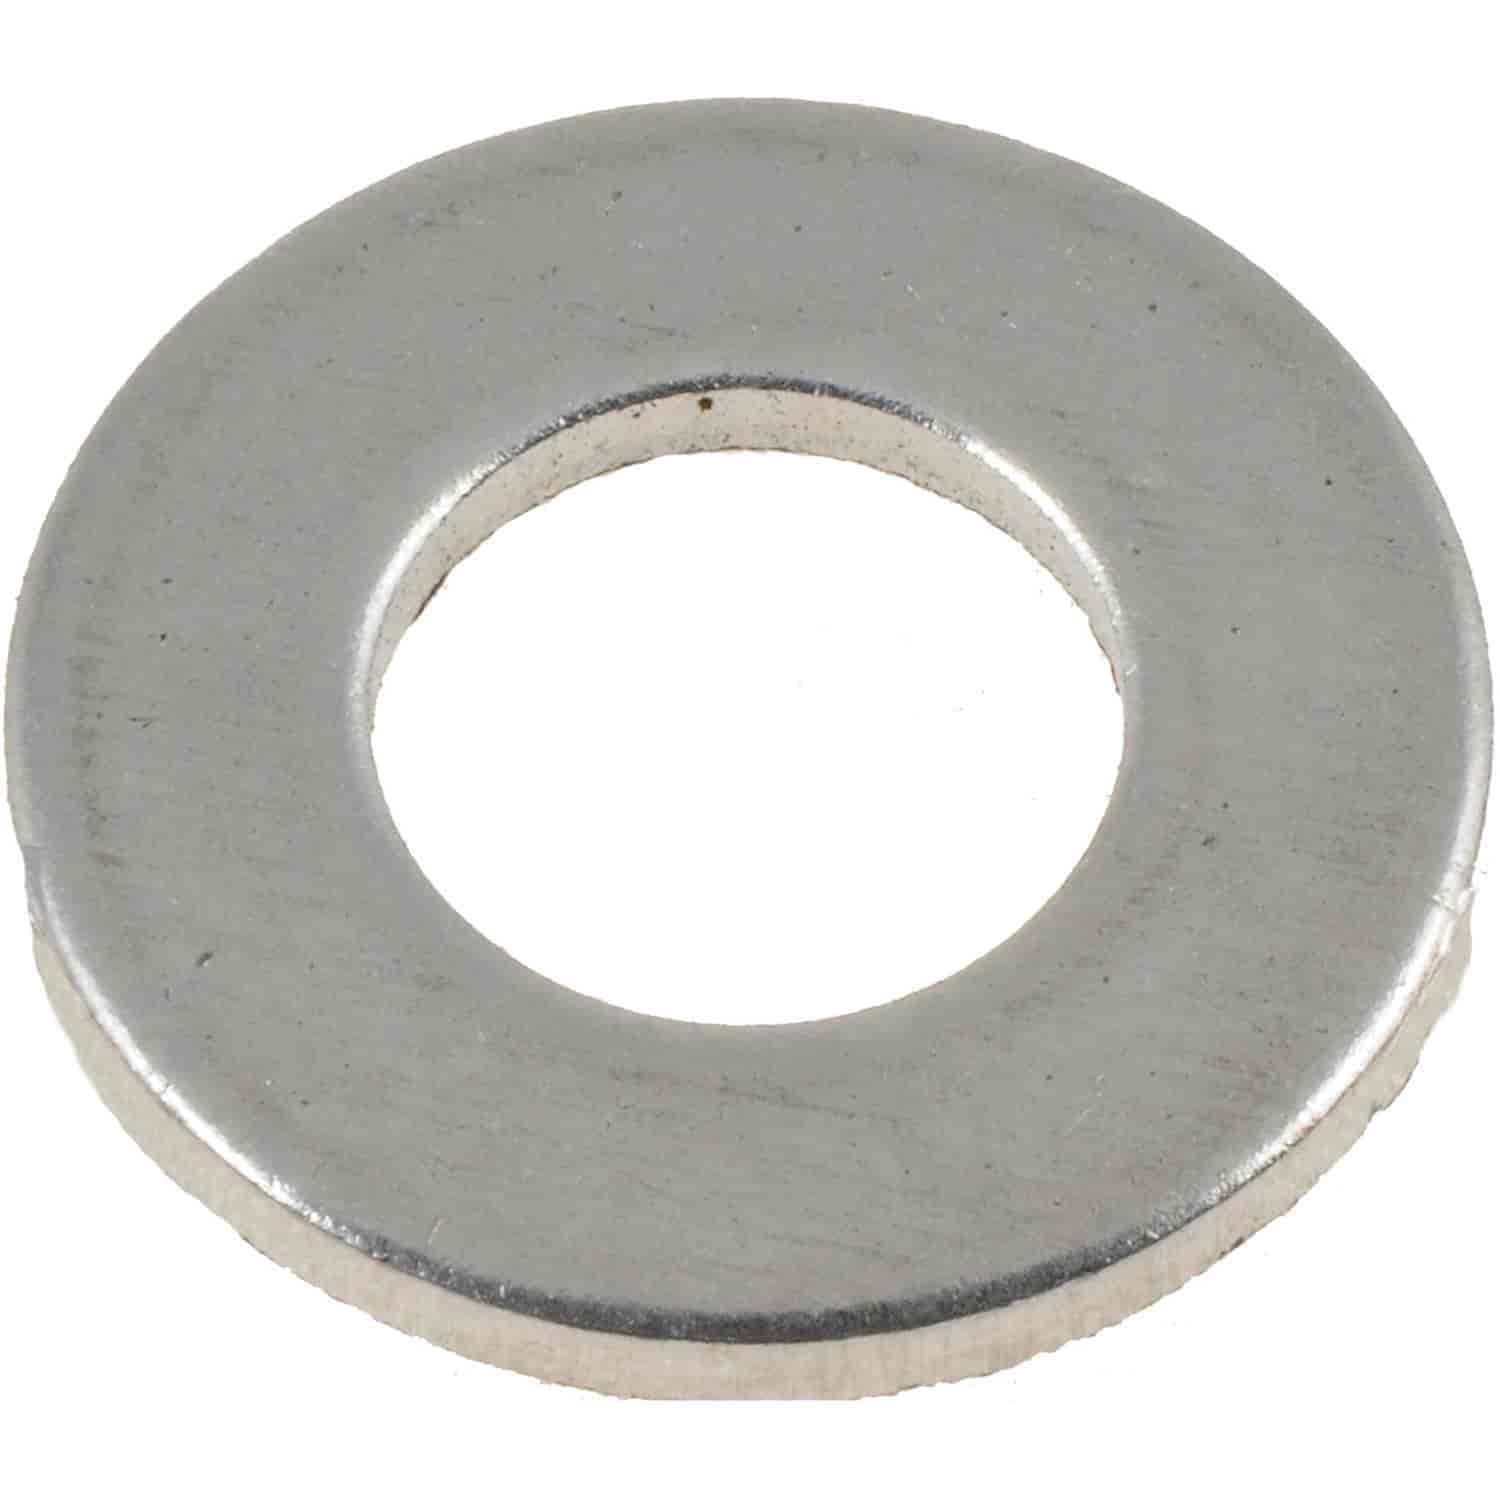 Flat Washer-Grade 5- 5/16 In.